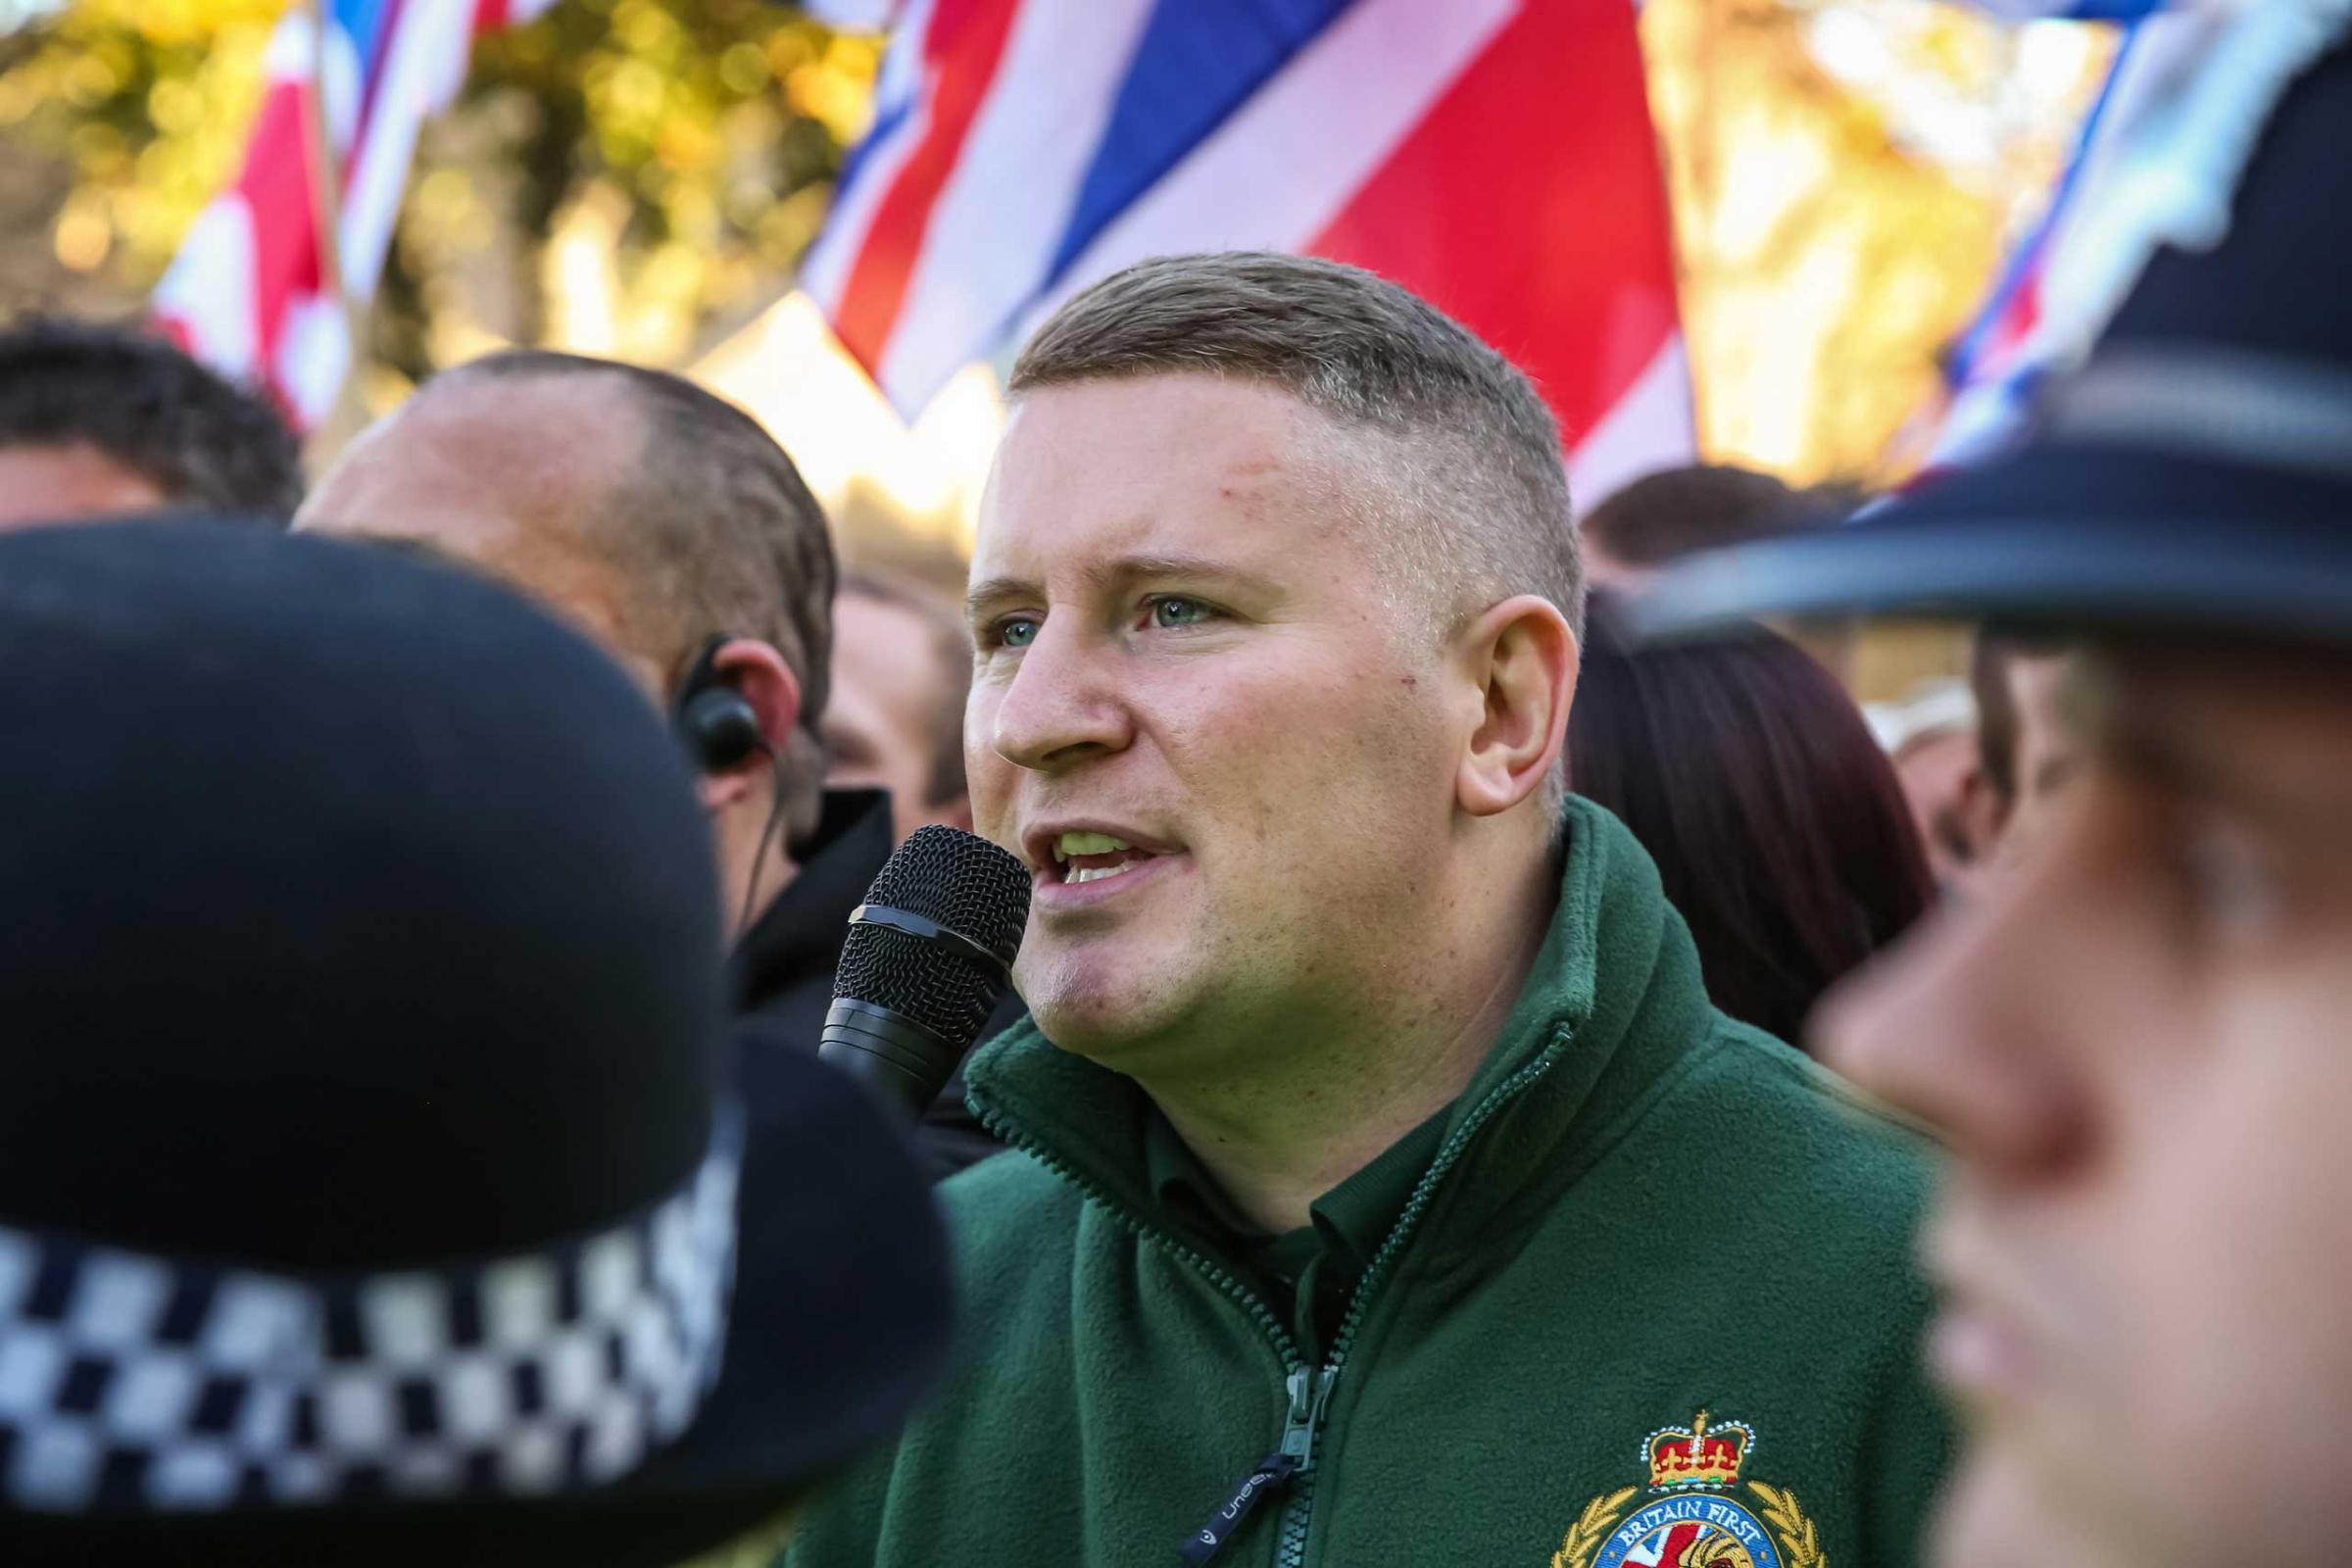 Paul Golding, leader of Britain First seen during a march in Rochester, England, Nov. 1, 2014.